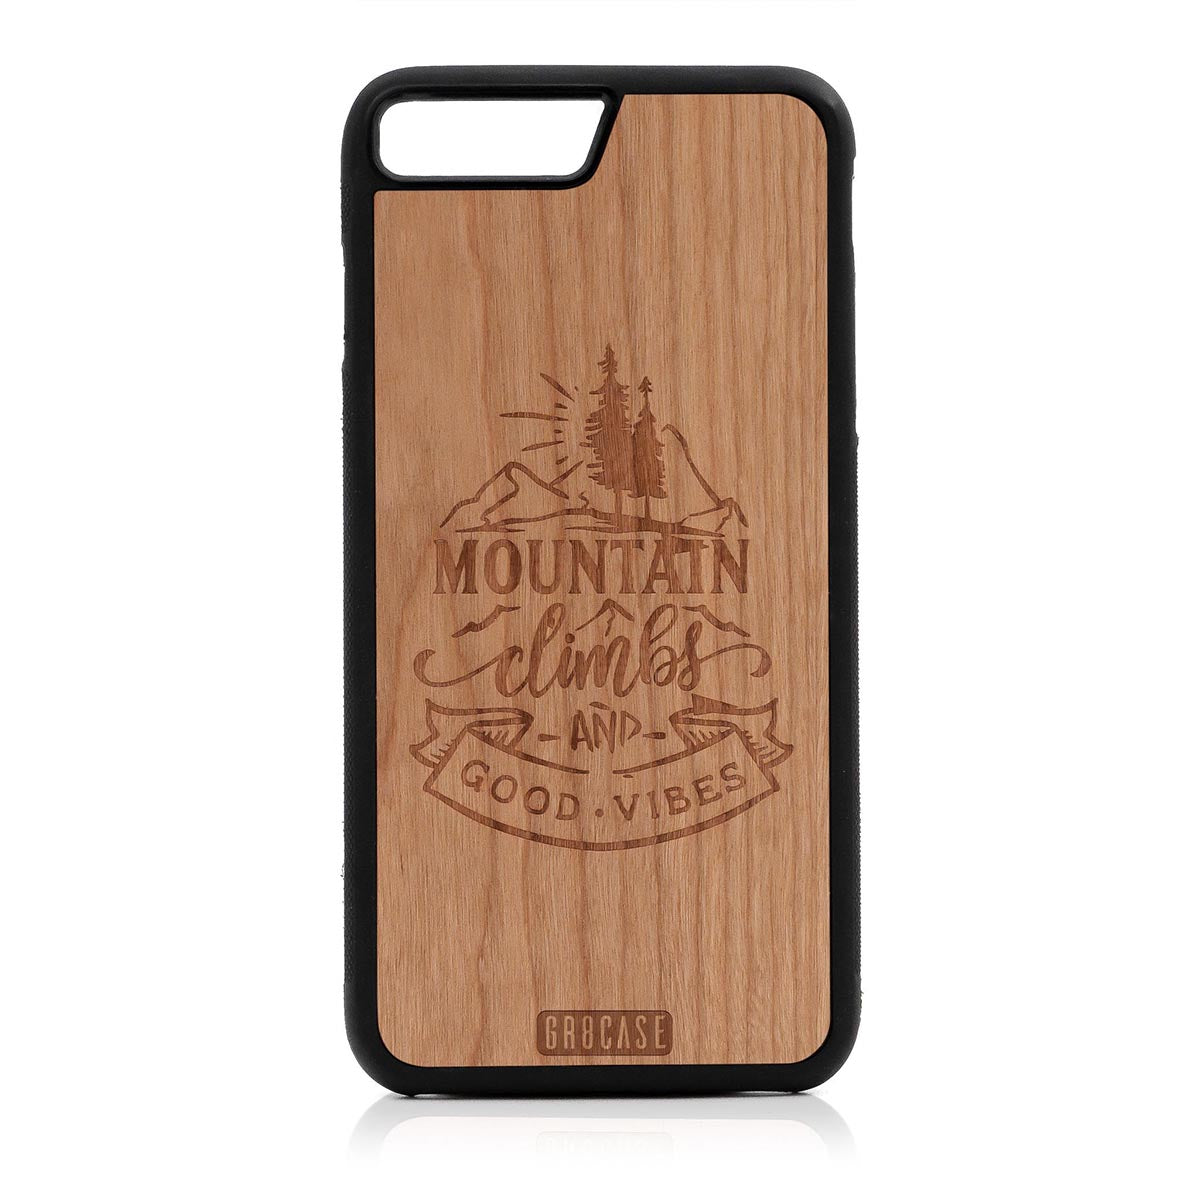 Mountain Climbs And Good Vibes Design Wood Case For iPhone 7 Plus / 8 Plus by GR8CASE